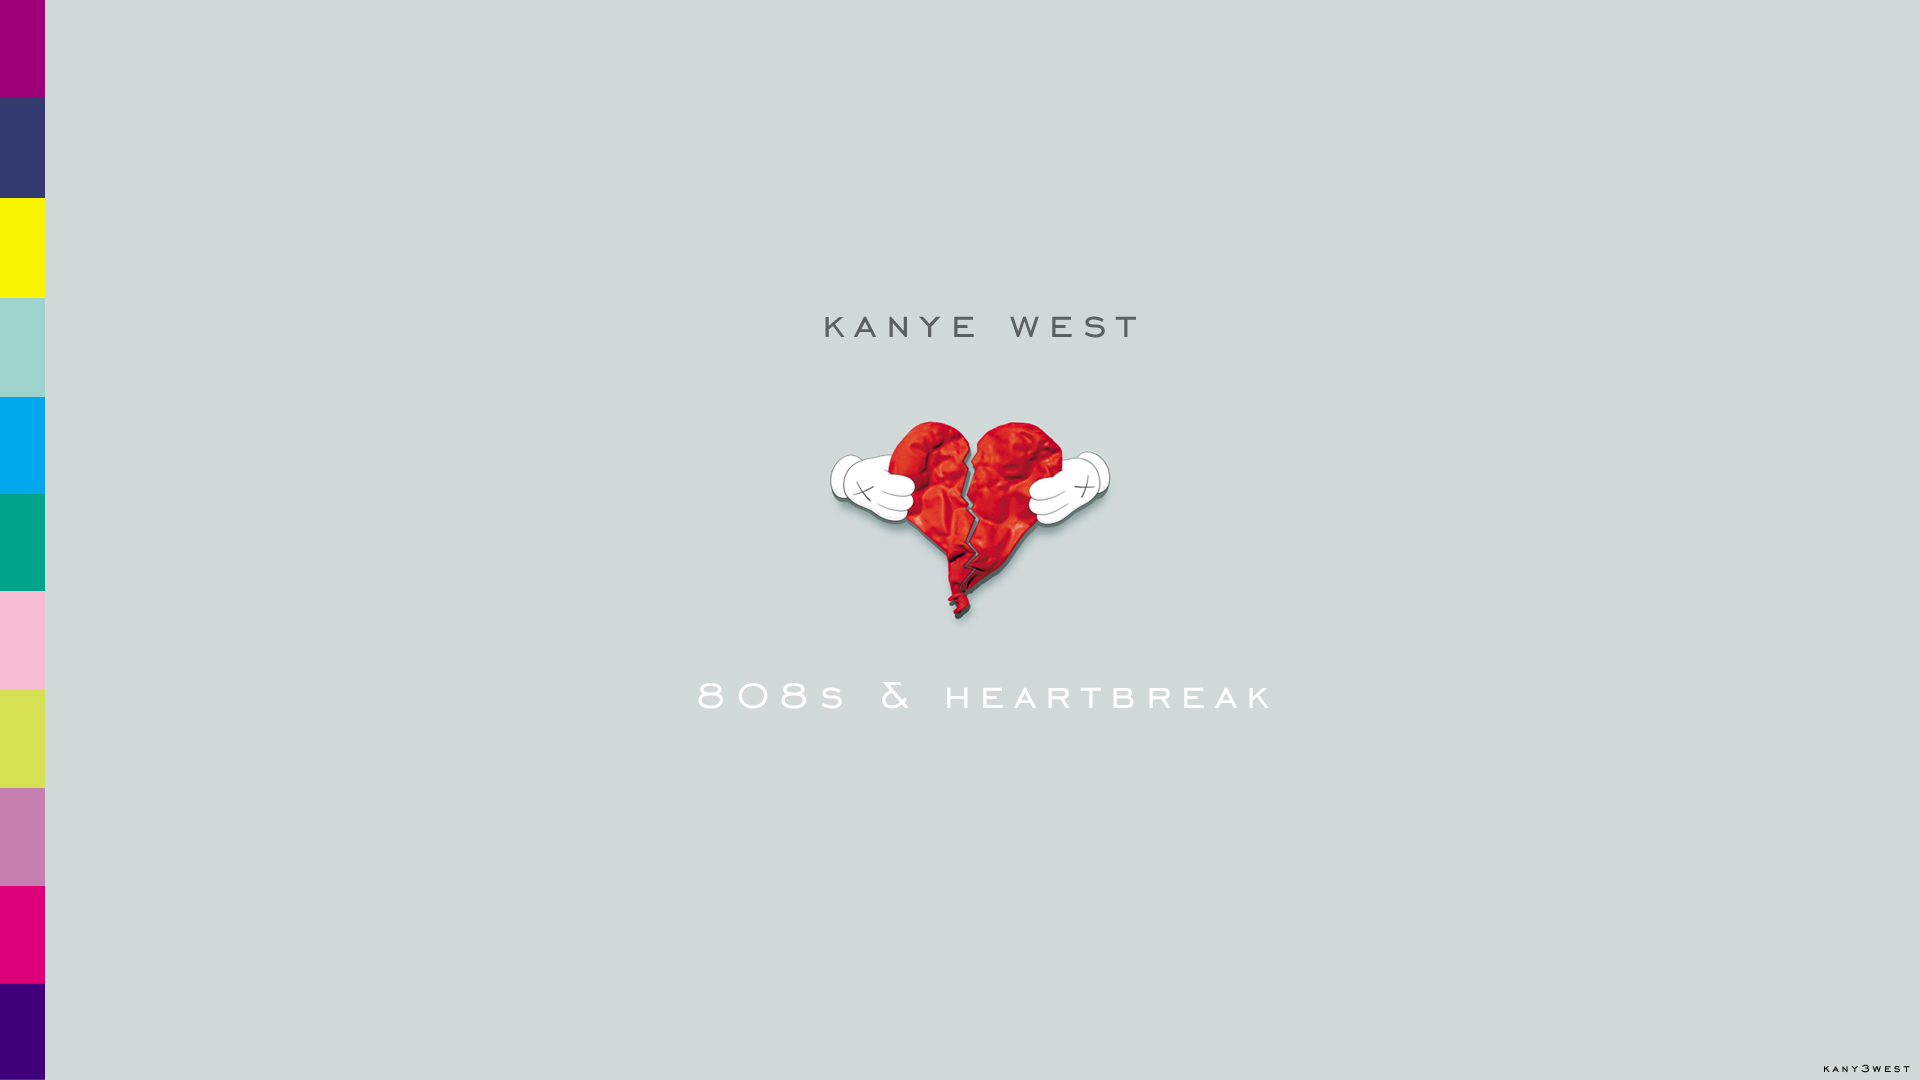 kanye west 808s and heartbreak album cover